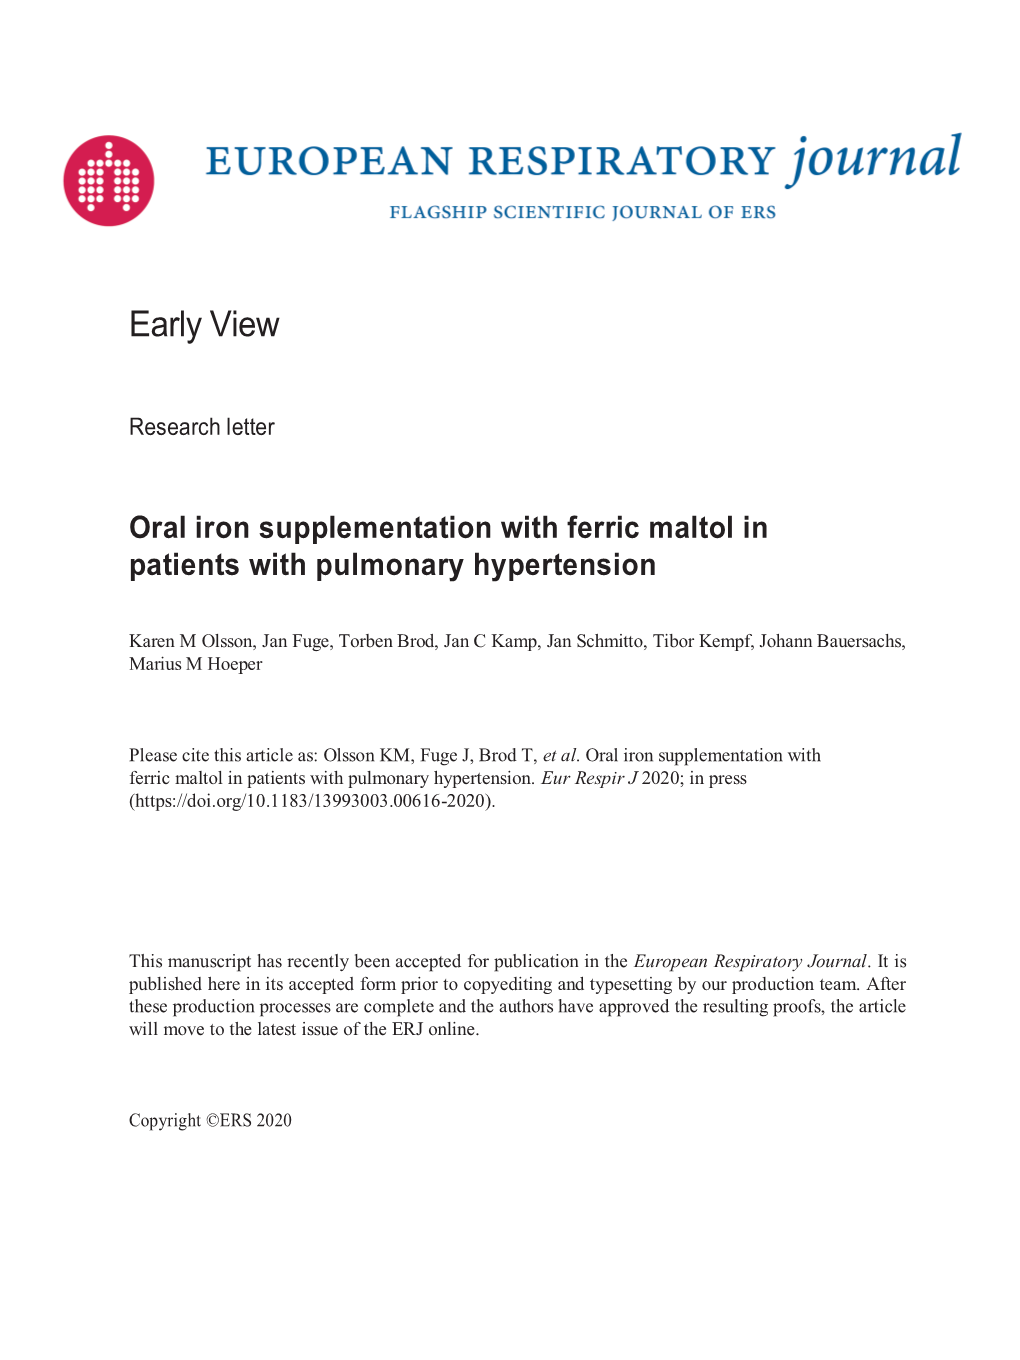 Oral Iron Supplementation with Ferric Maltol in Patients with Pulmonary Hypertension